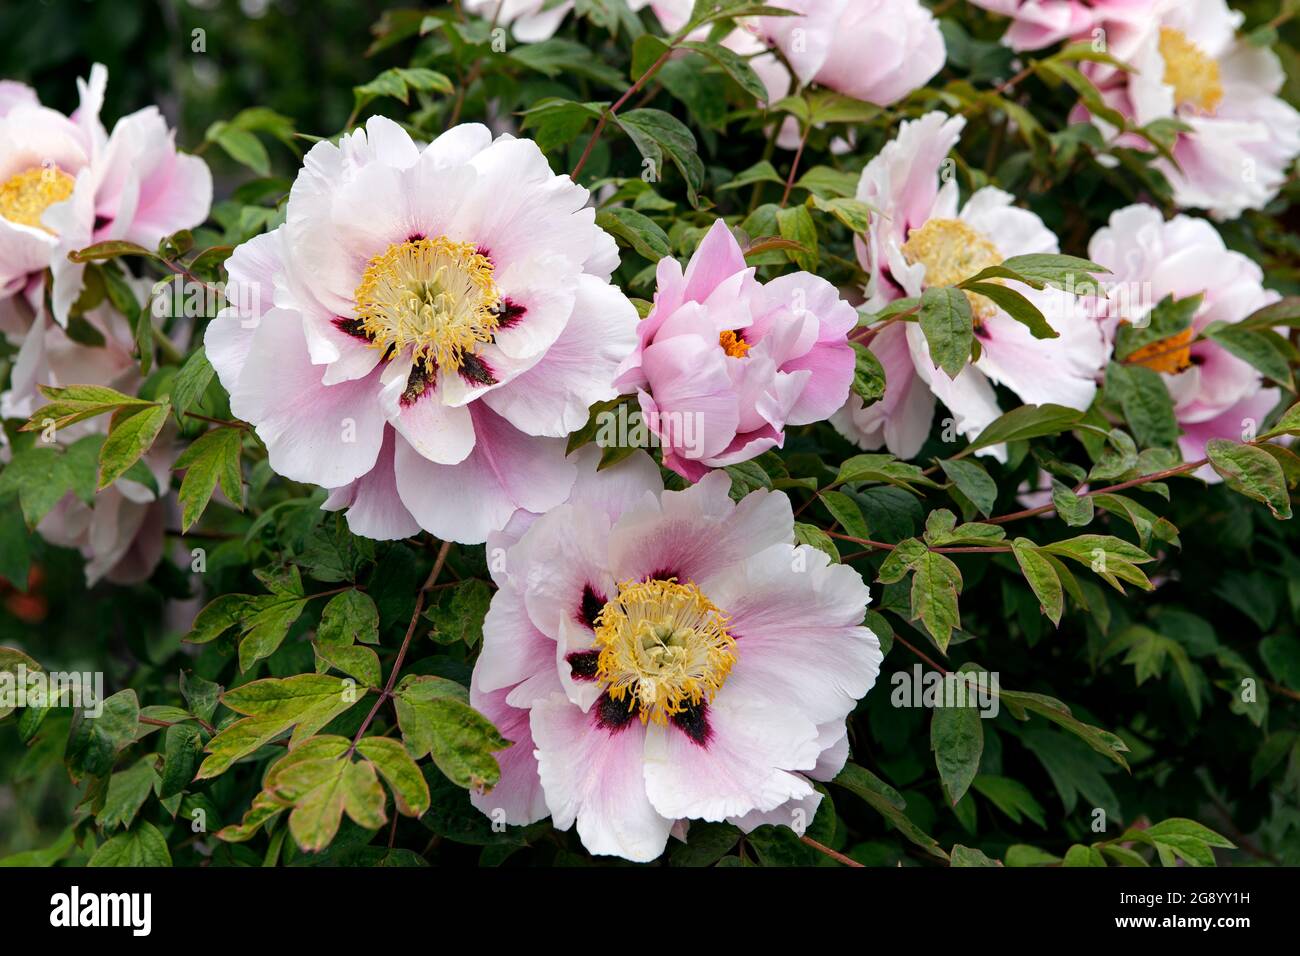 Paeonia lactiflora, Chinese peony. Beautiful bush of pink peonies in full bloom. Close-up of large flowers. Summer garden, rural style garden. Stock Photo